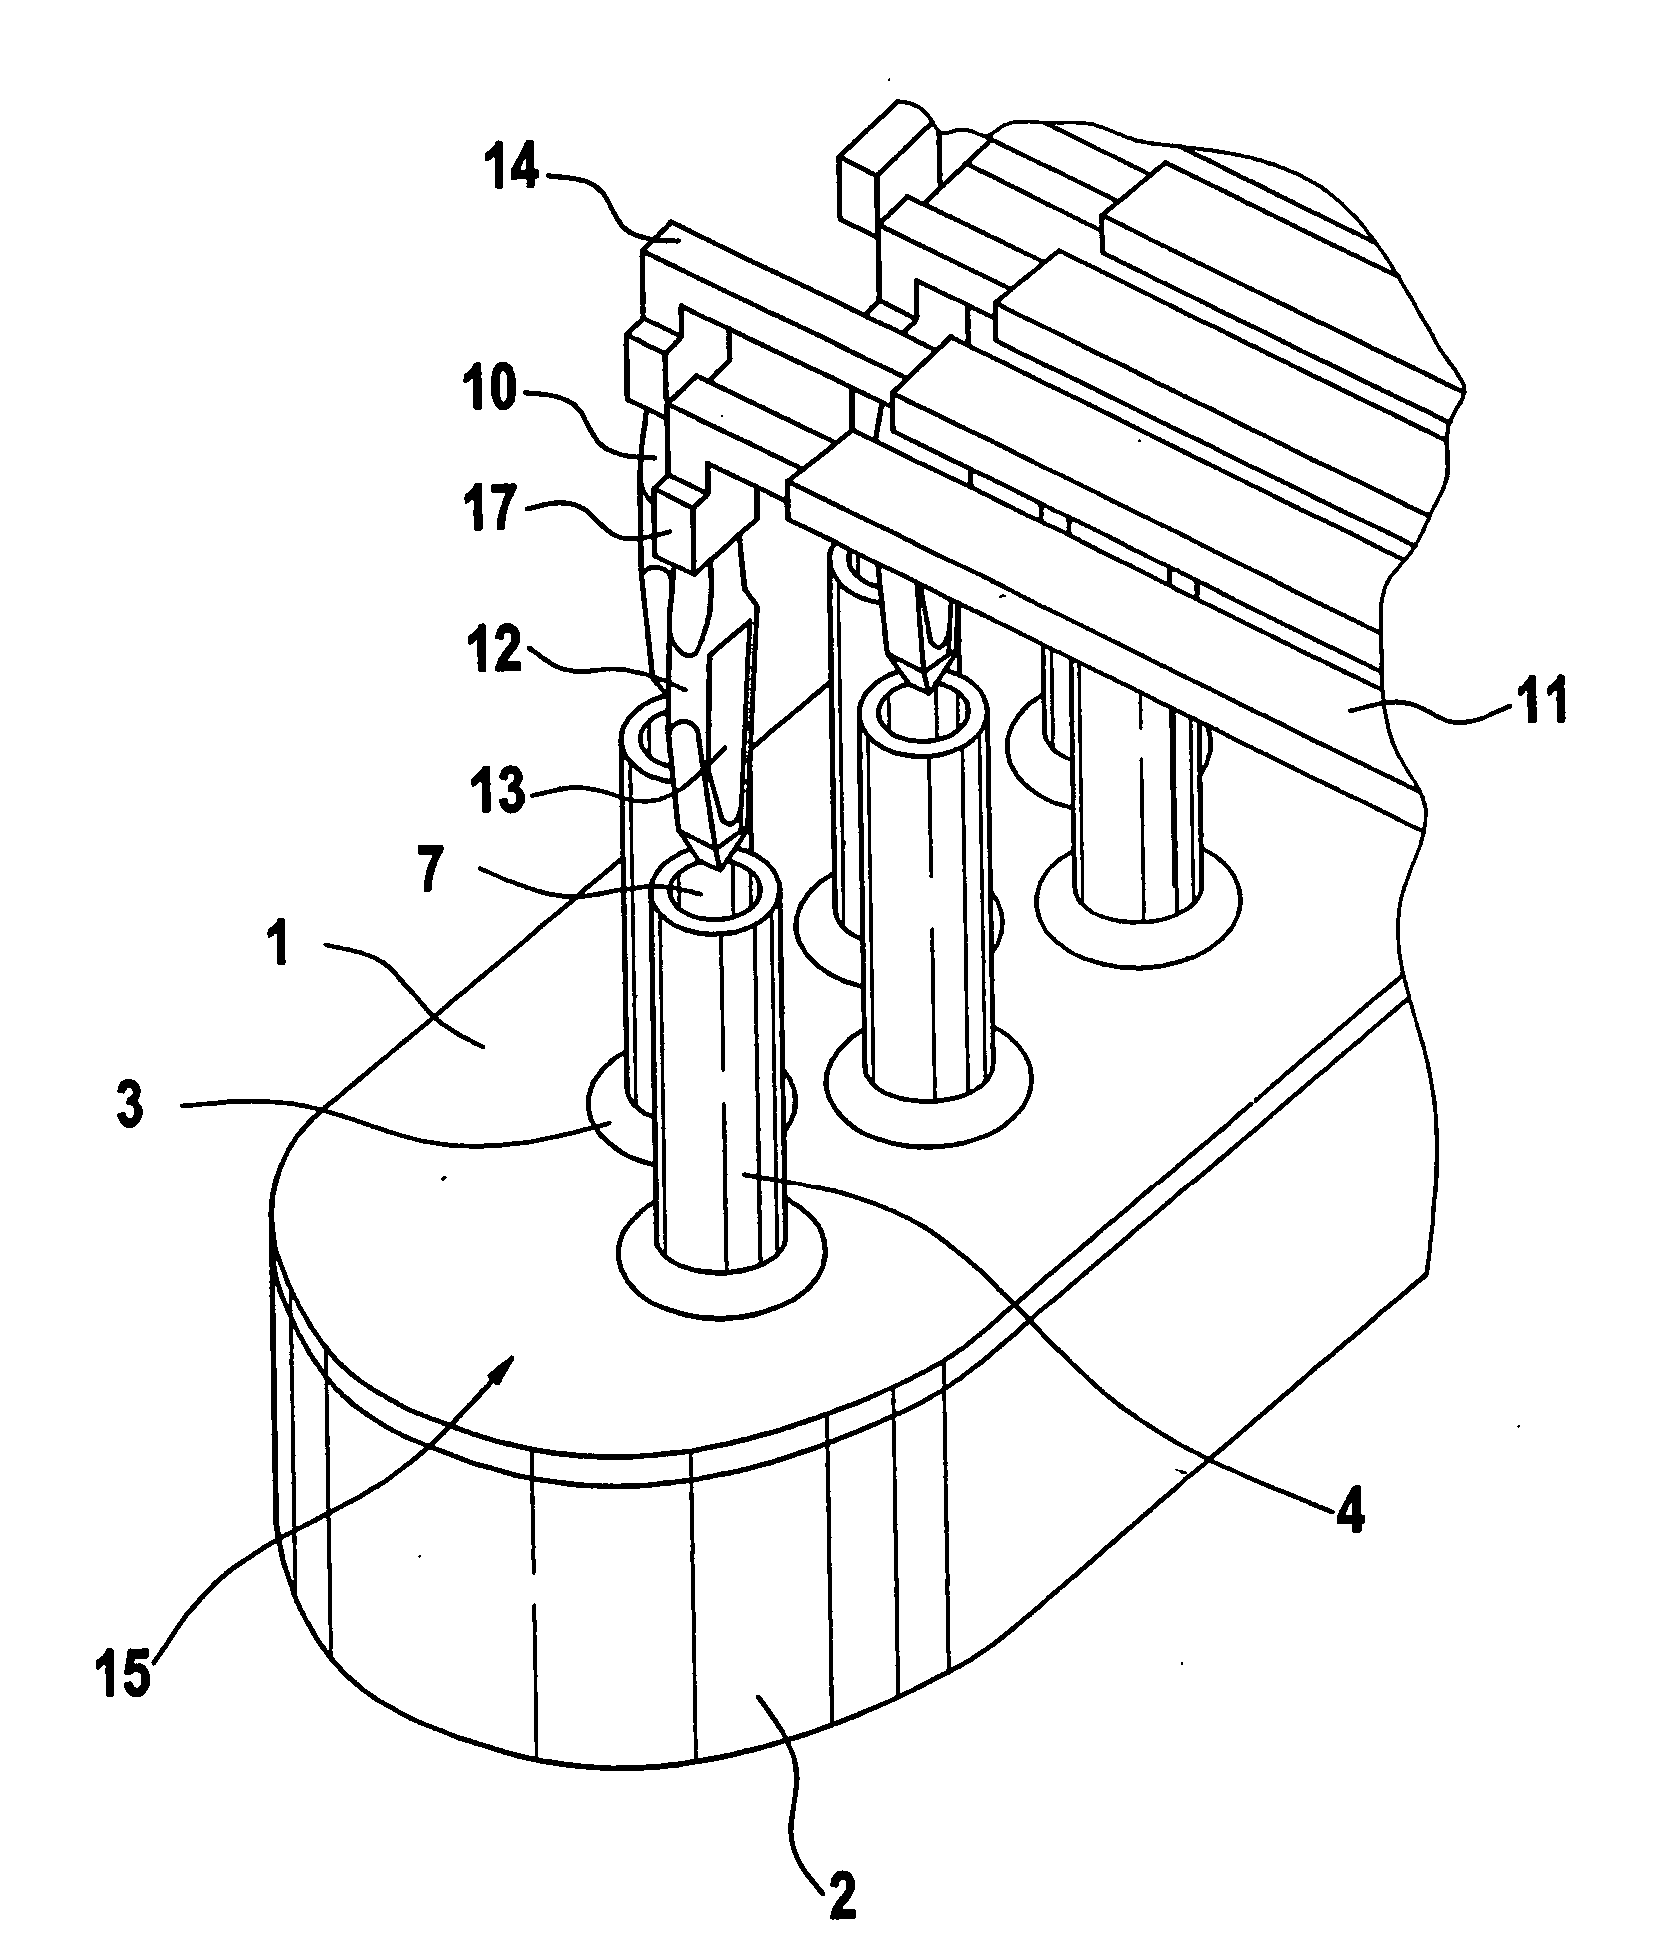 System for electrical contacting